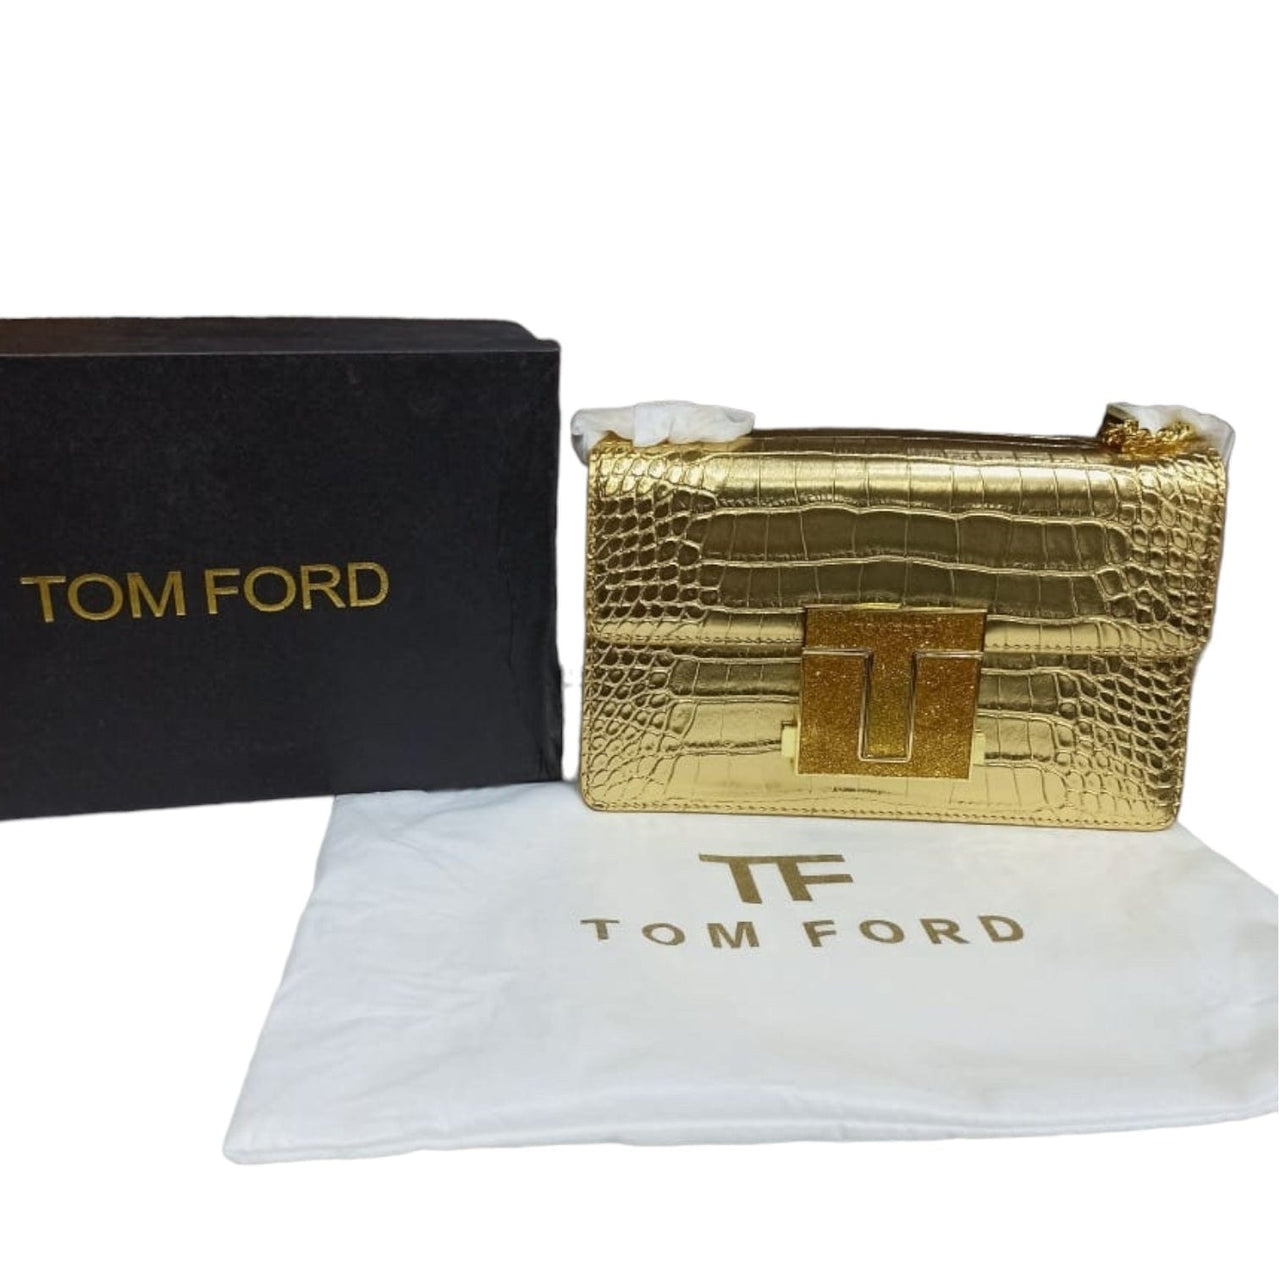 The Bag Couture Handbags, Wallets & Cases TOM FORD Logo Clasp Crocodile Embossed Leather Shoulder Bag Gold